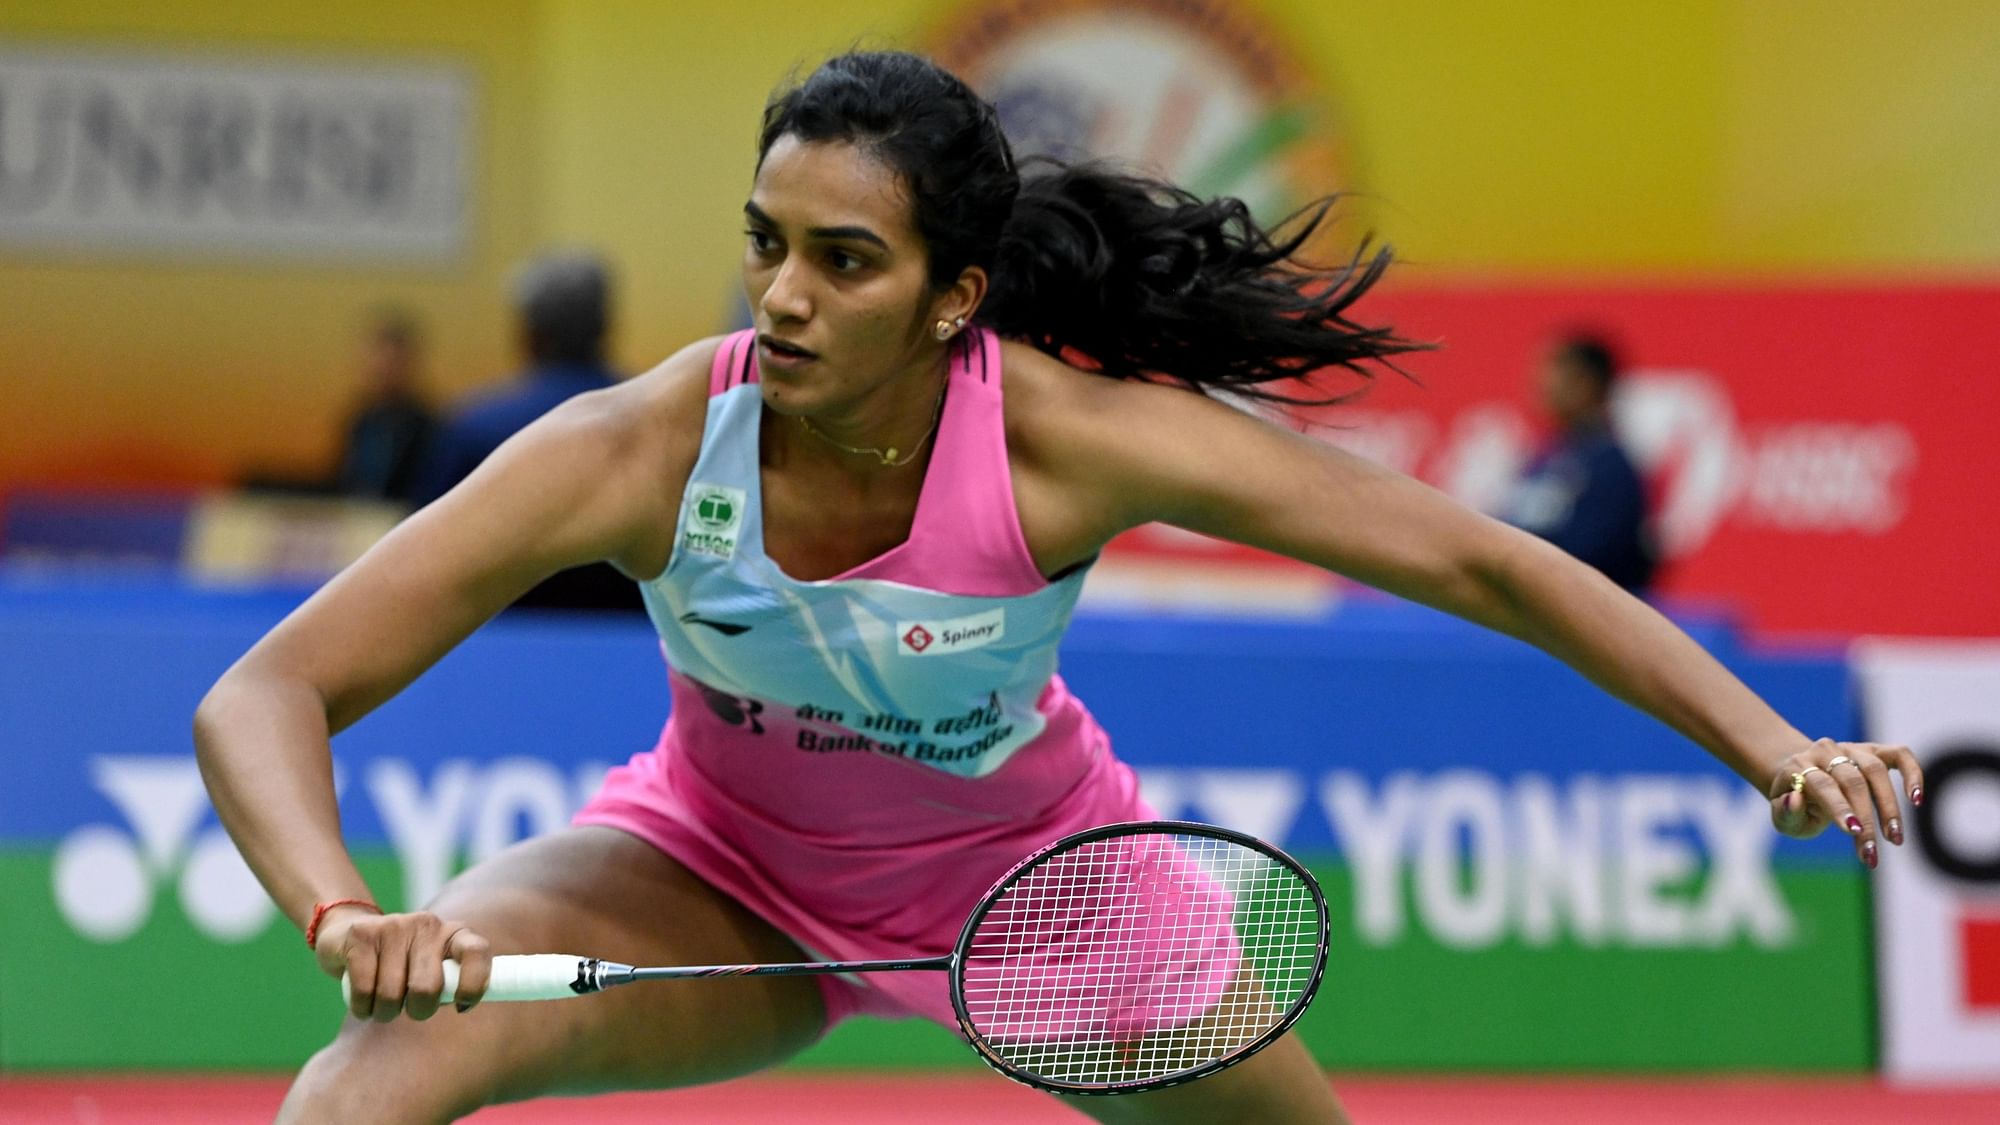 <div class="paragraphs"><p>PV Sindhu&nbsp;lost to 6th seed Han Yue of China in a three-game battle with a scoreline of 18-21, 21-13, 17-21.</p></div>